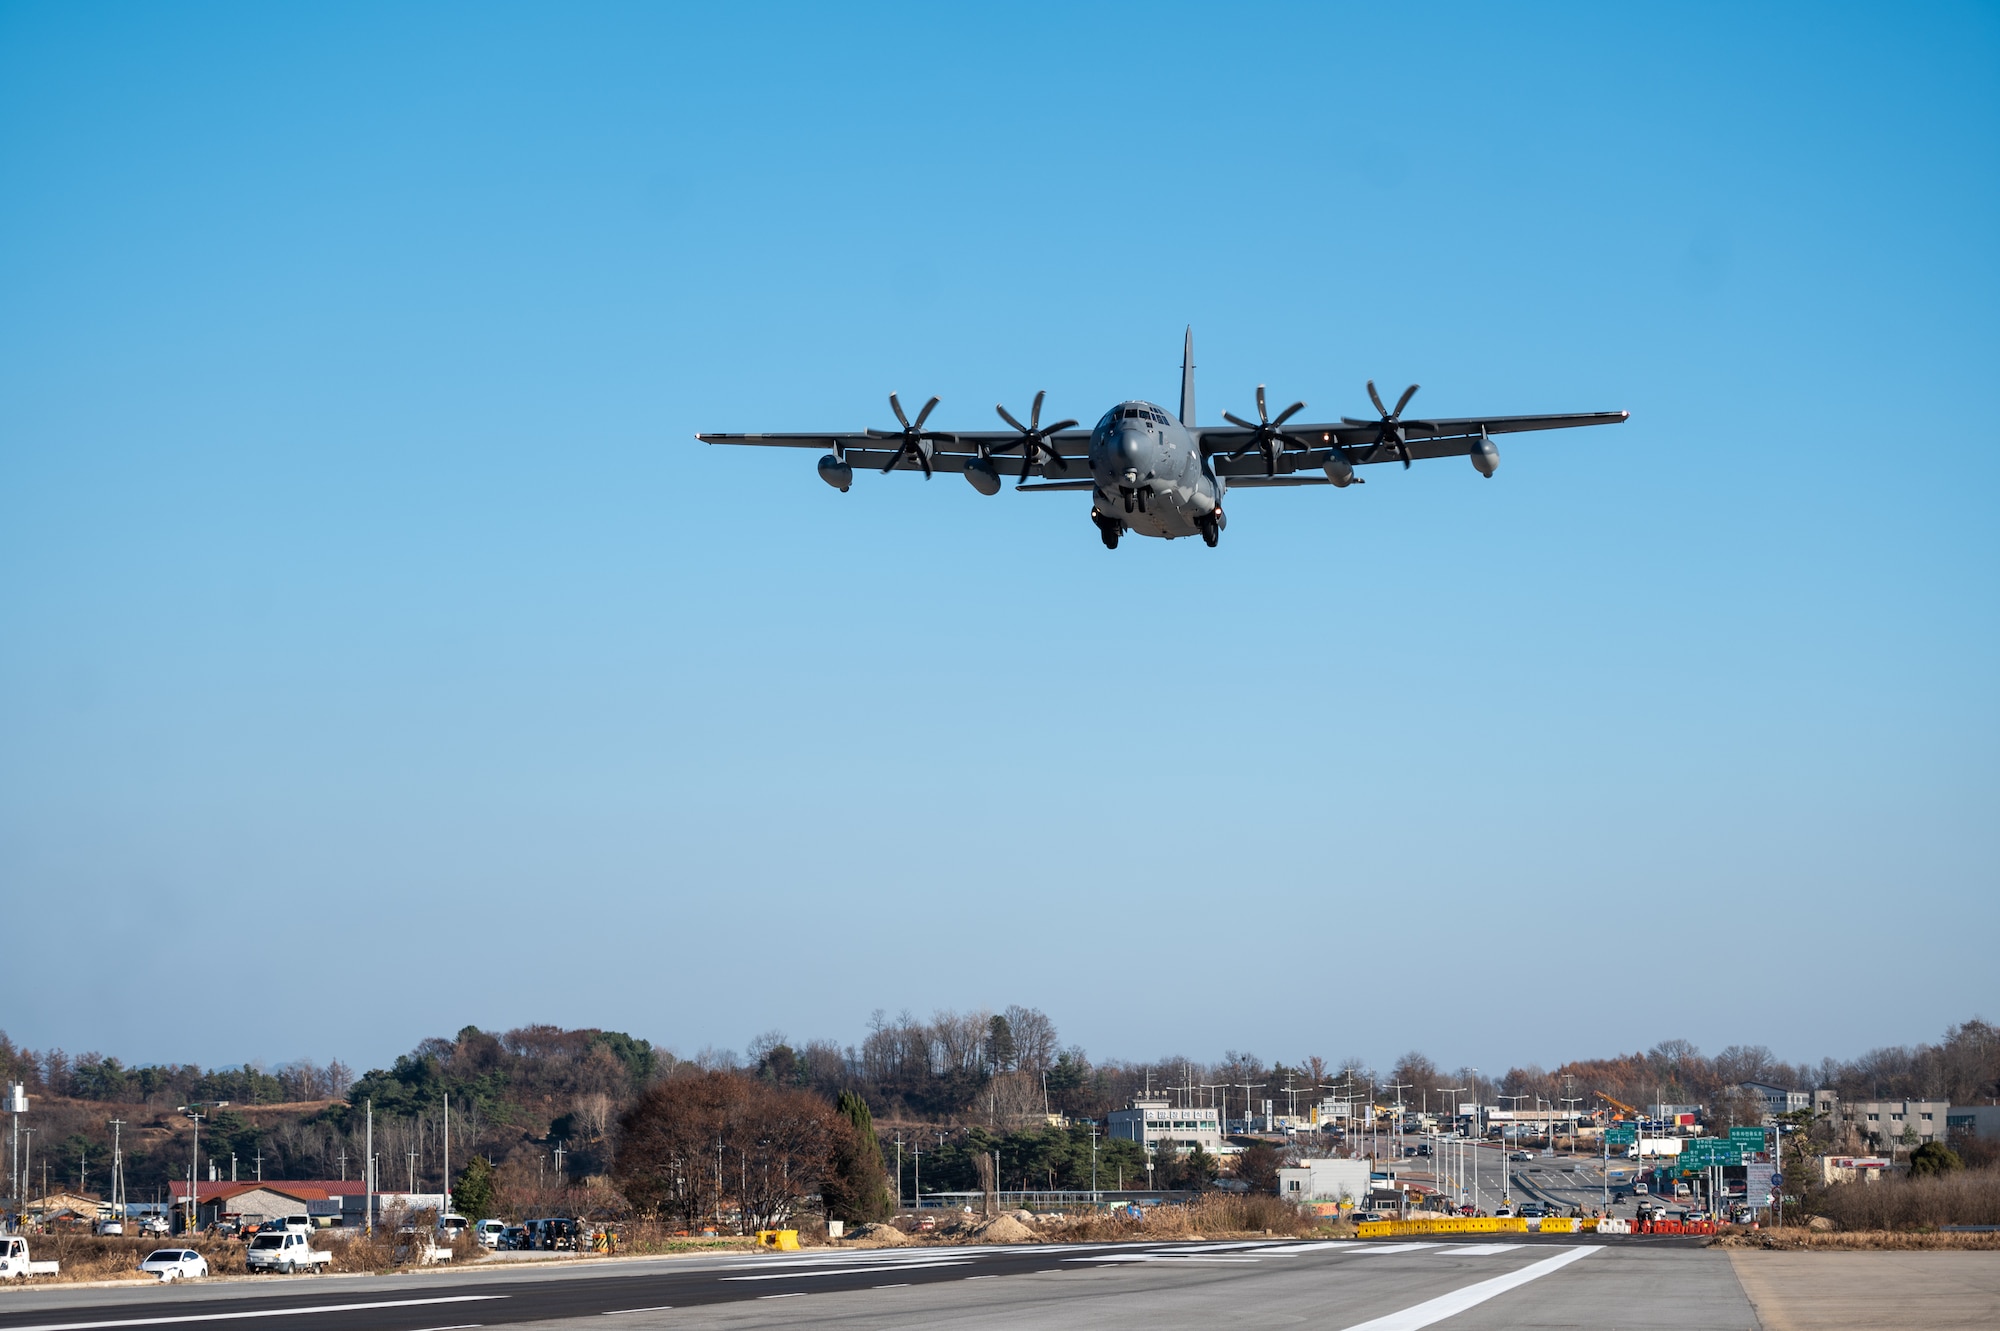 A U.S. Air Force MC-130J Commando II performs a low approach at an emergency landing strip as part of a combined training event involving USAF and Republic of Korea Air Force partners